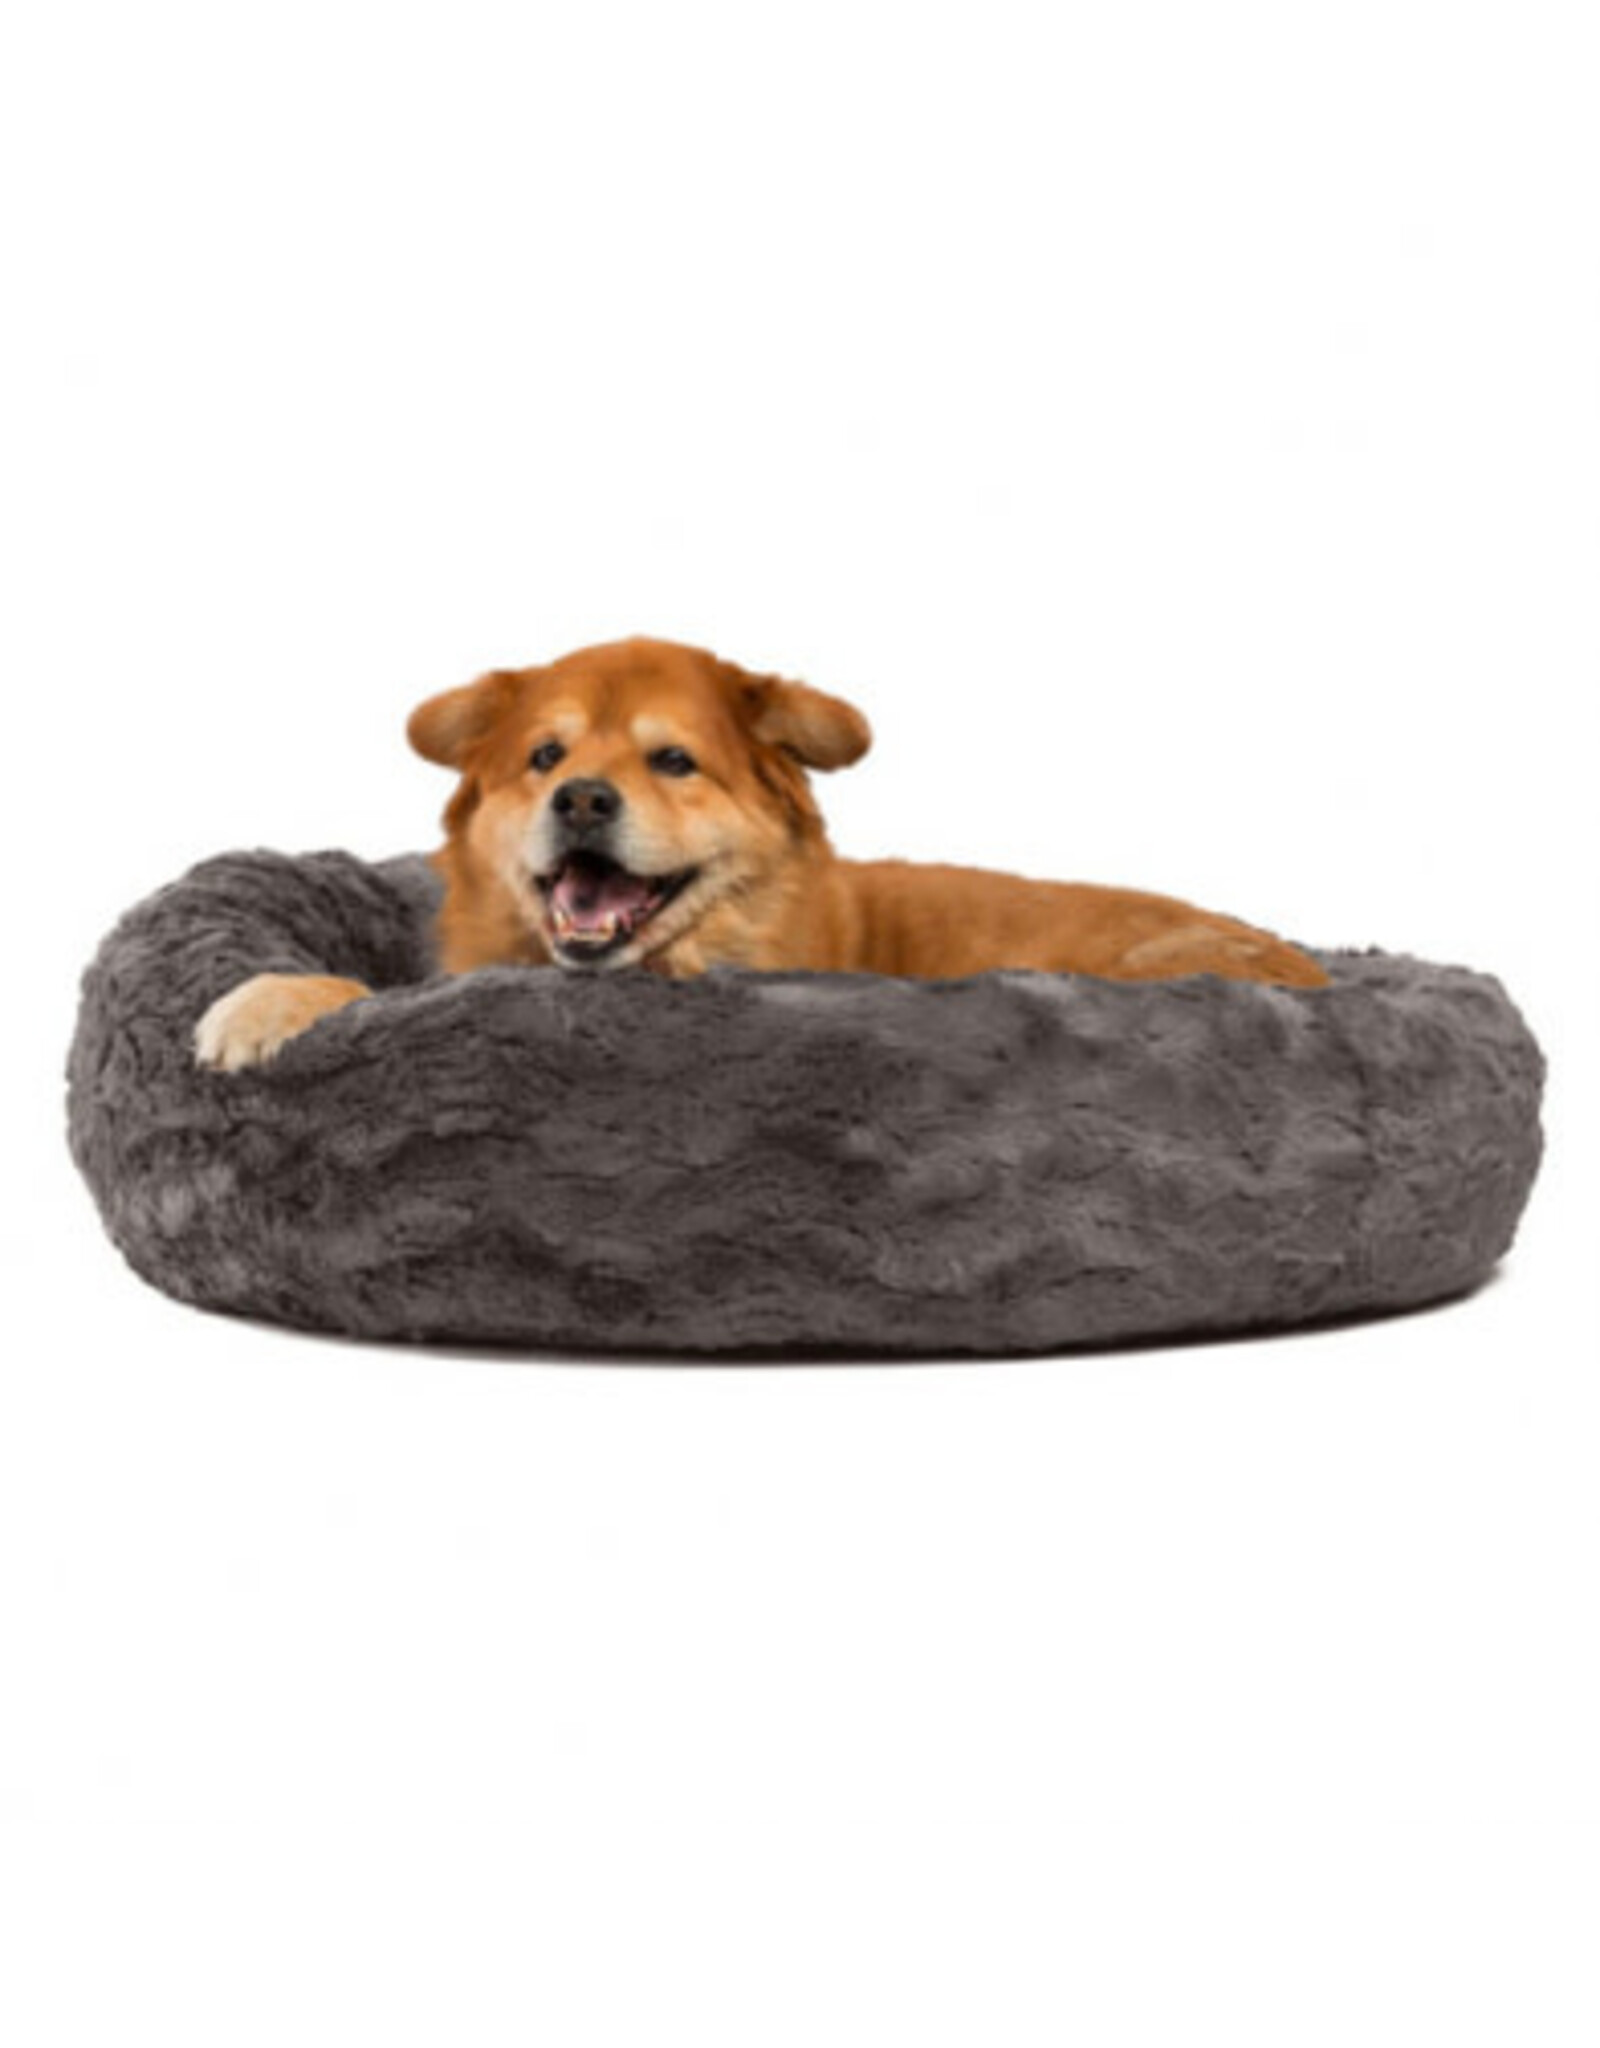 BFBS Donut bed Lux fur Charcoal 30x30''